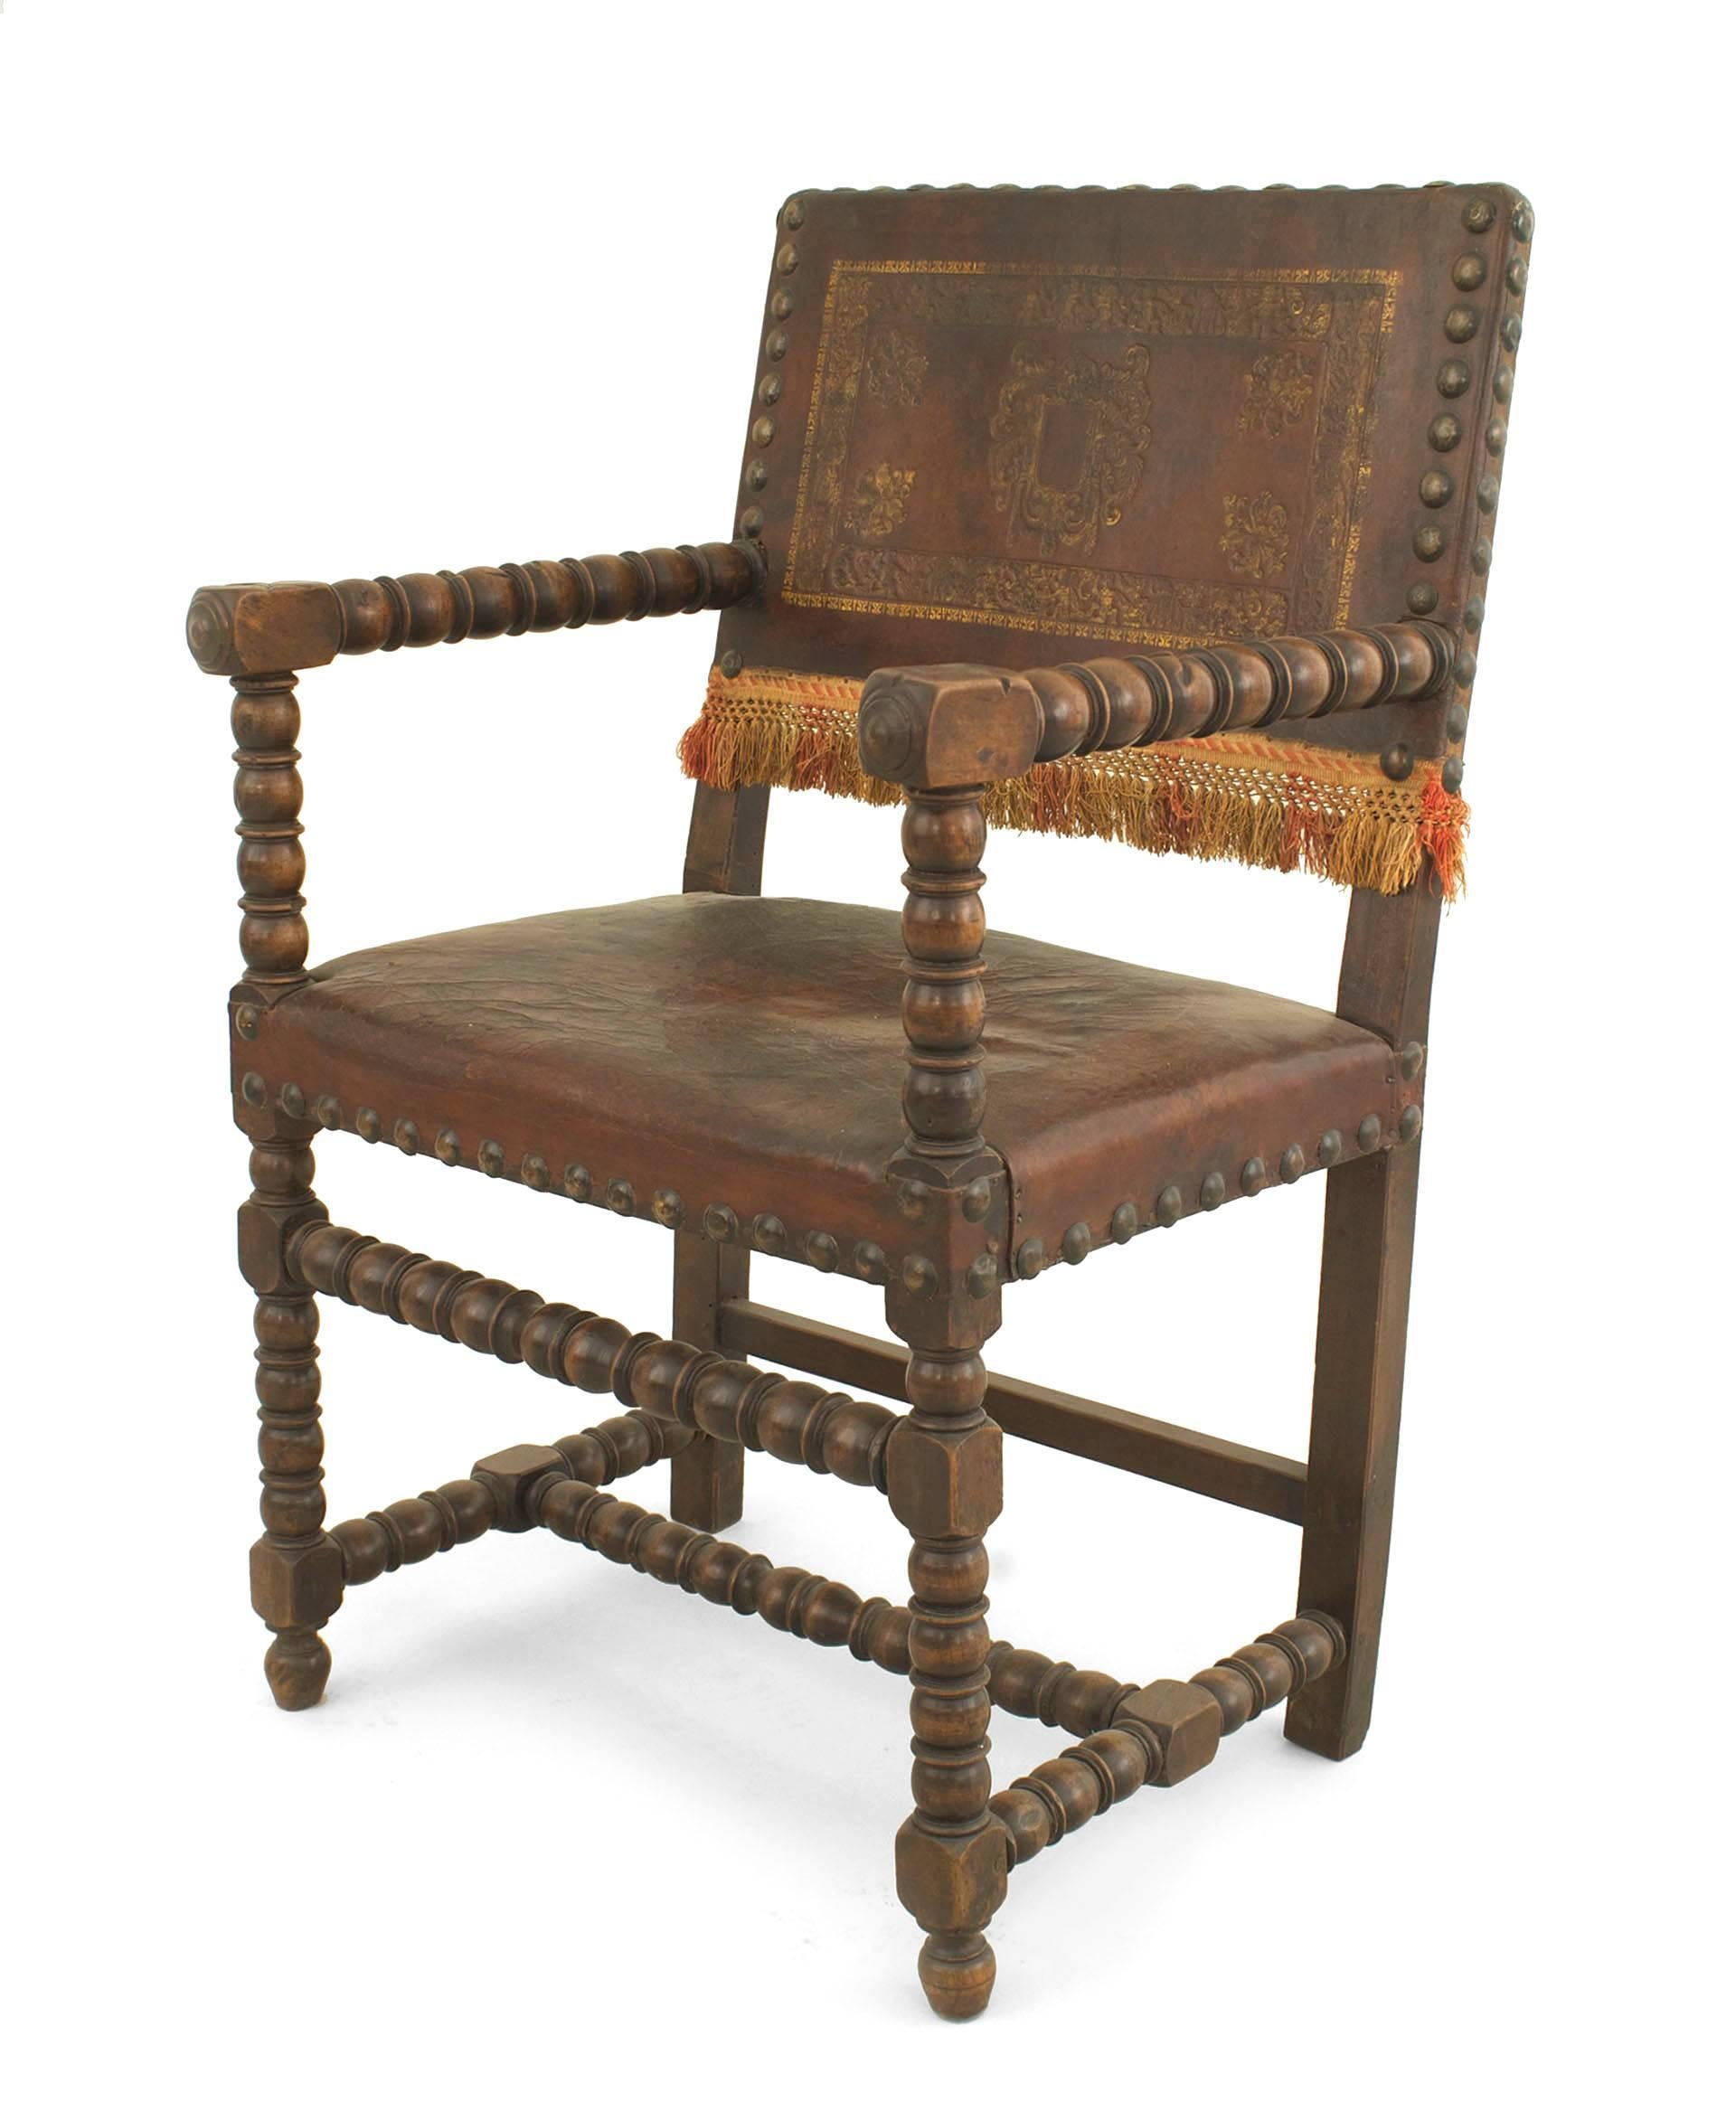 Italian Renaissance style (18/19th Cent) walnut arm chair with spool design on arms and stretcher with a brown leather seat and embossed design on back.
